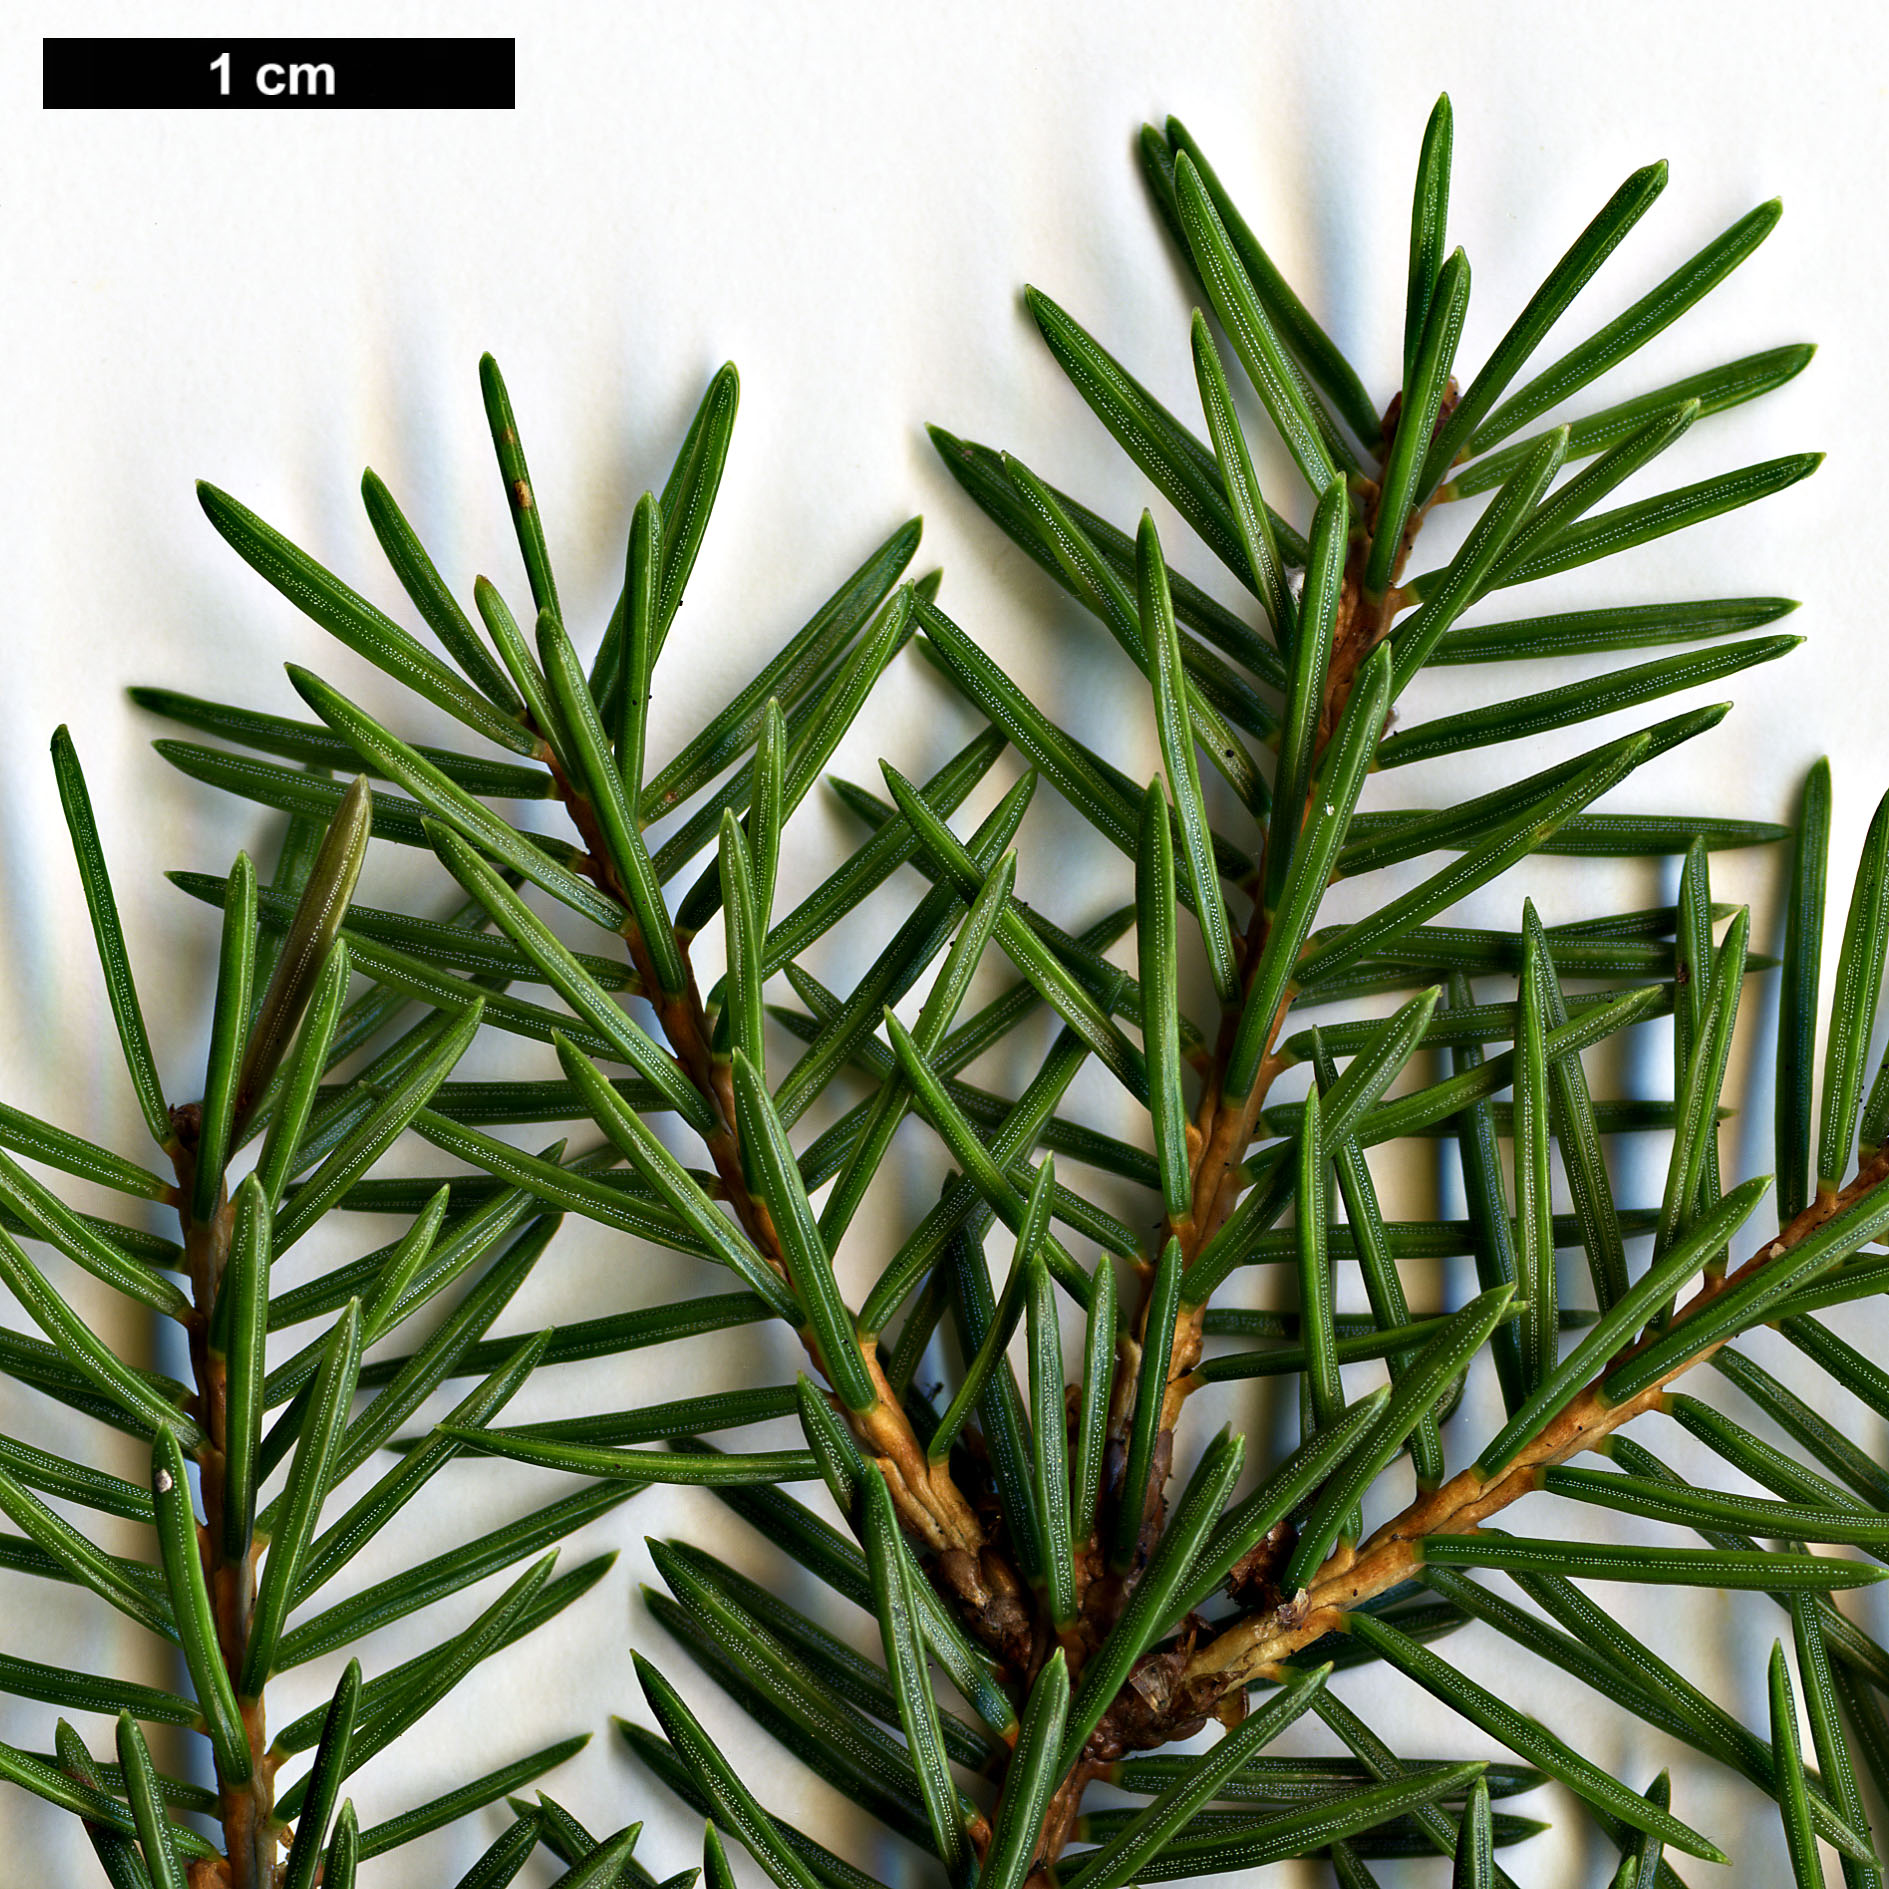 High resolution image: Family: Pinaceae - Genus: Picea - Taxon: maximowiczii